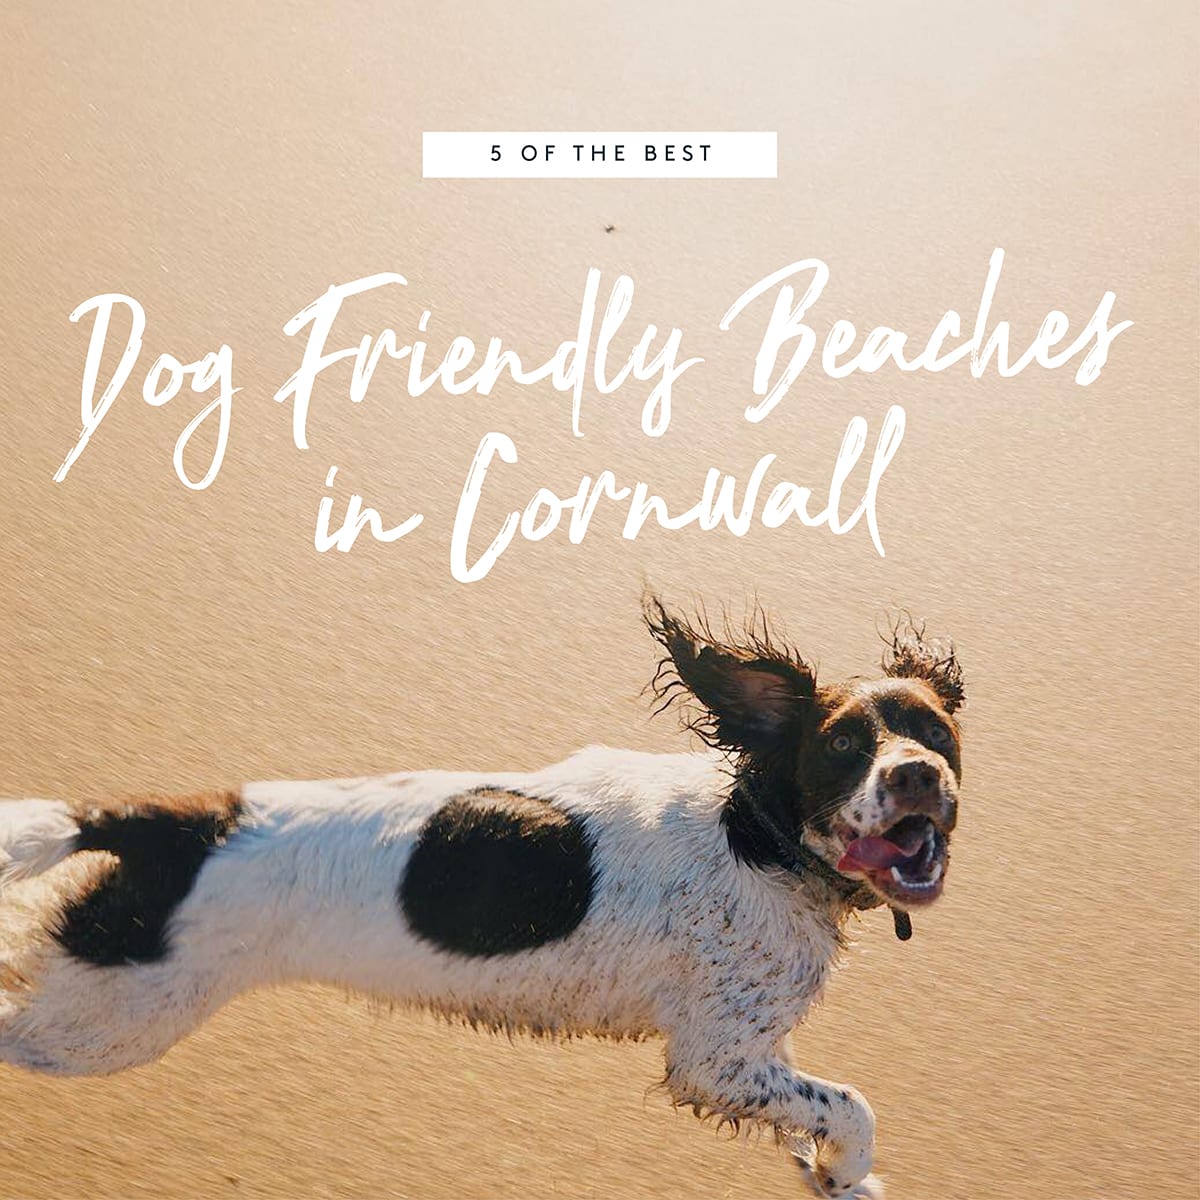 5 of the Best Dog Friendly Beaches in Cornwall